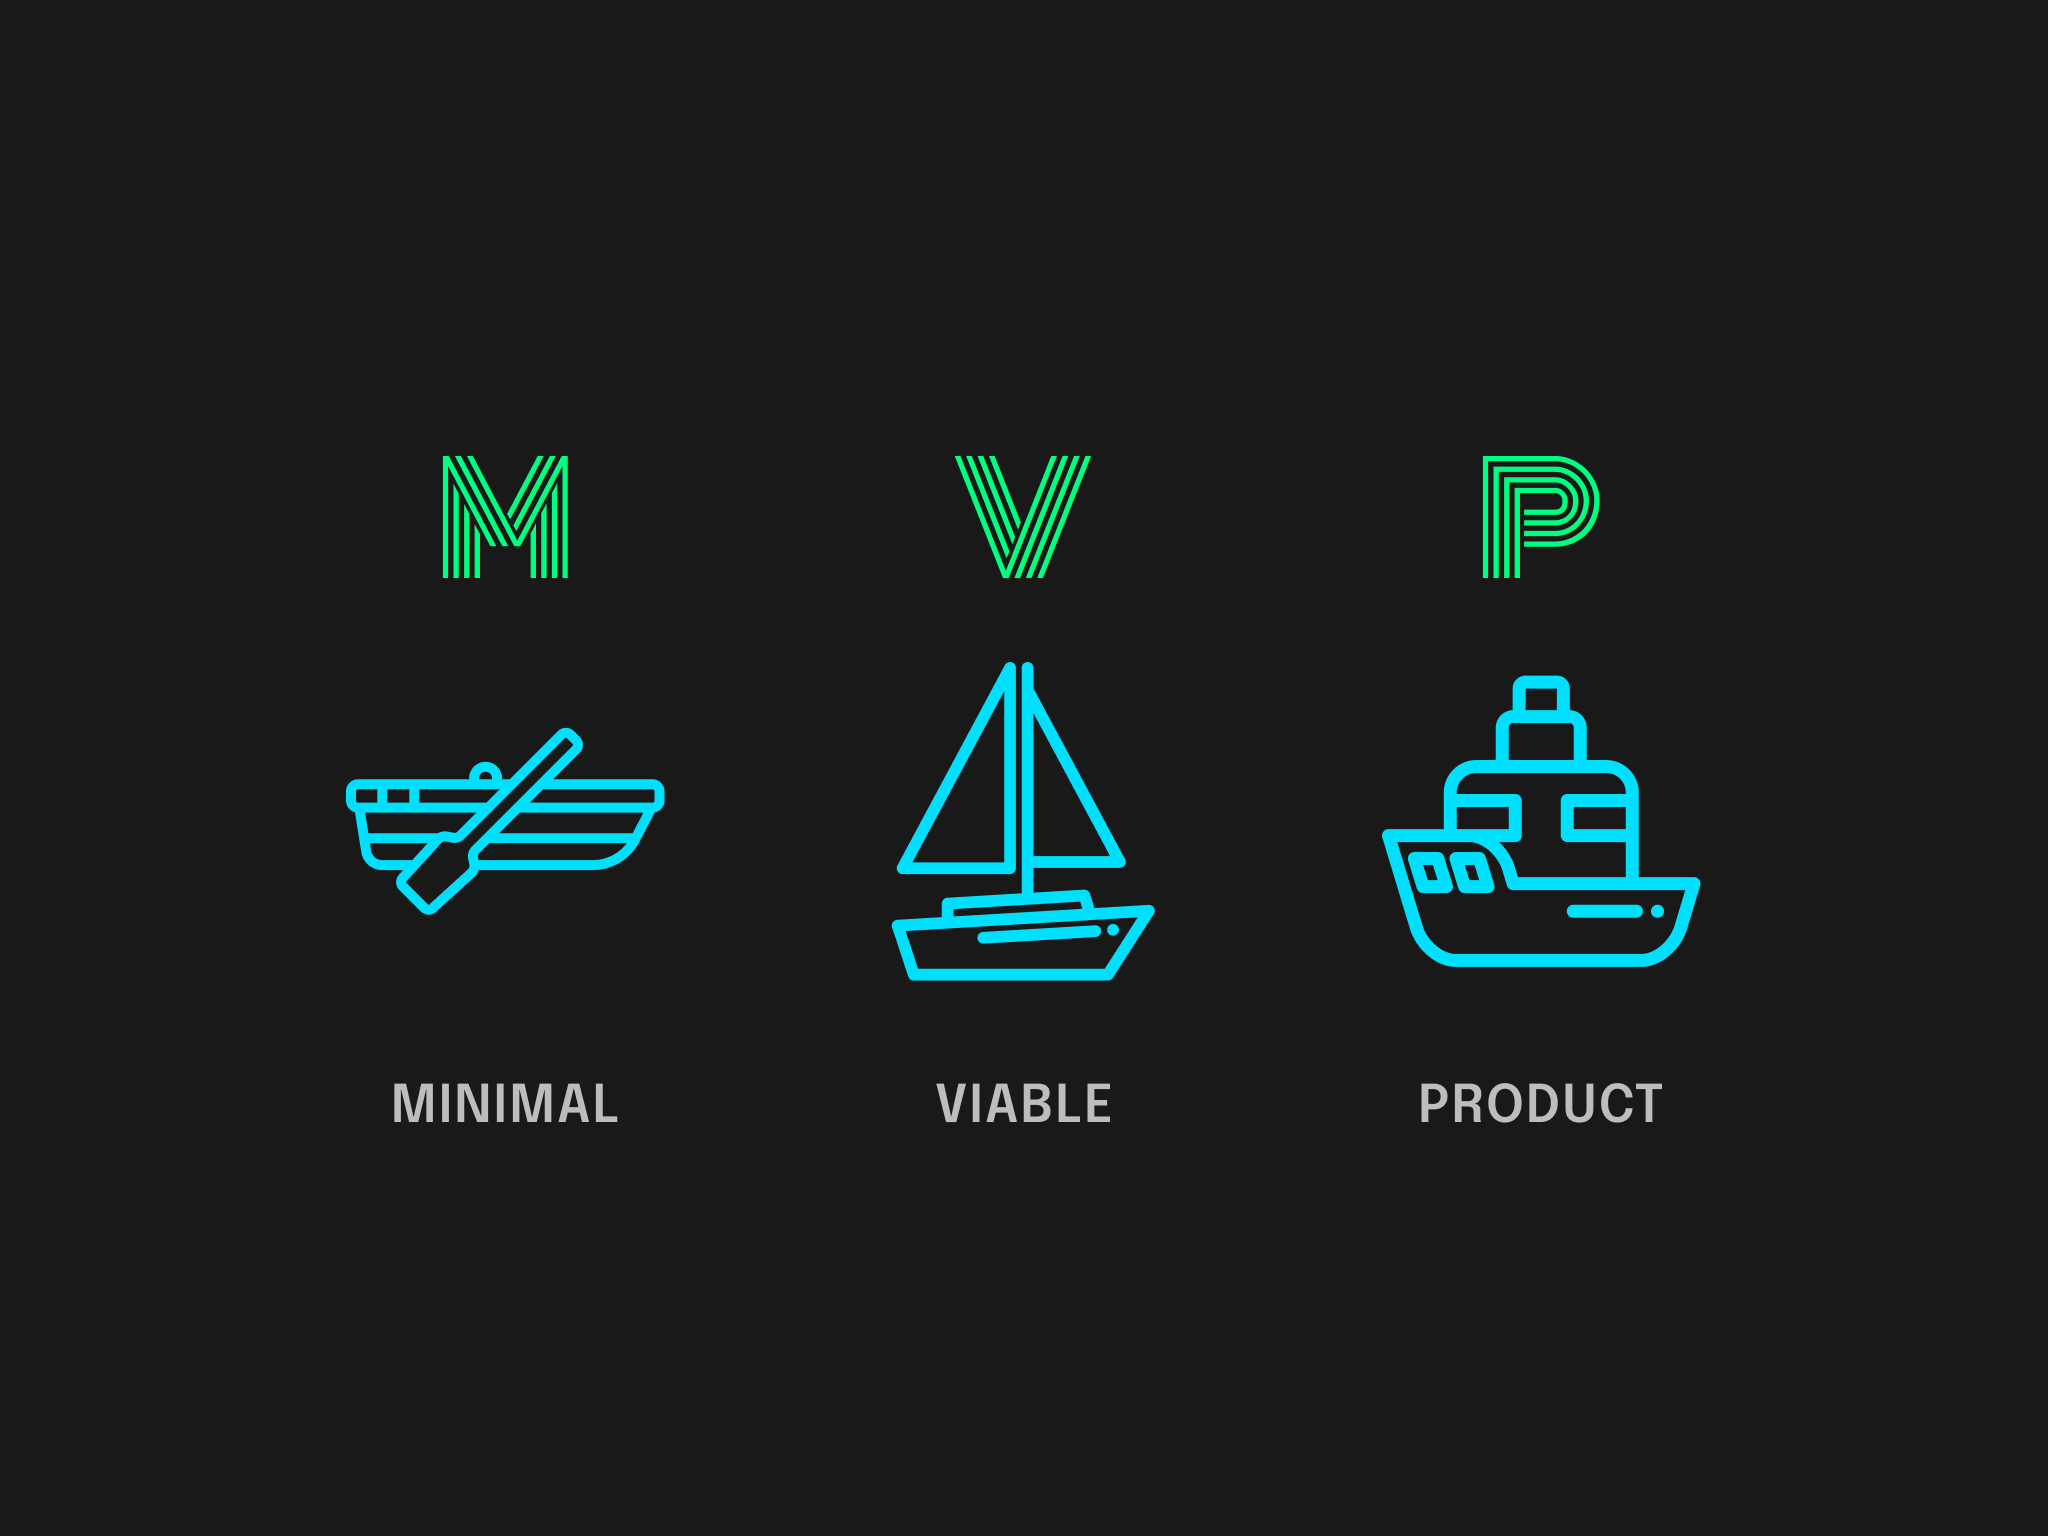 How to create a Minimum Viable Product (MVP) on a limited budget.